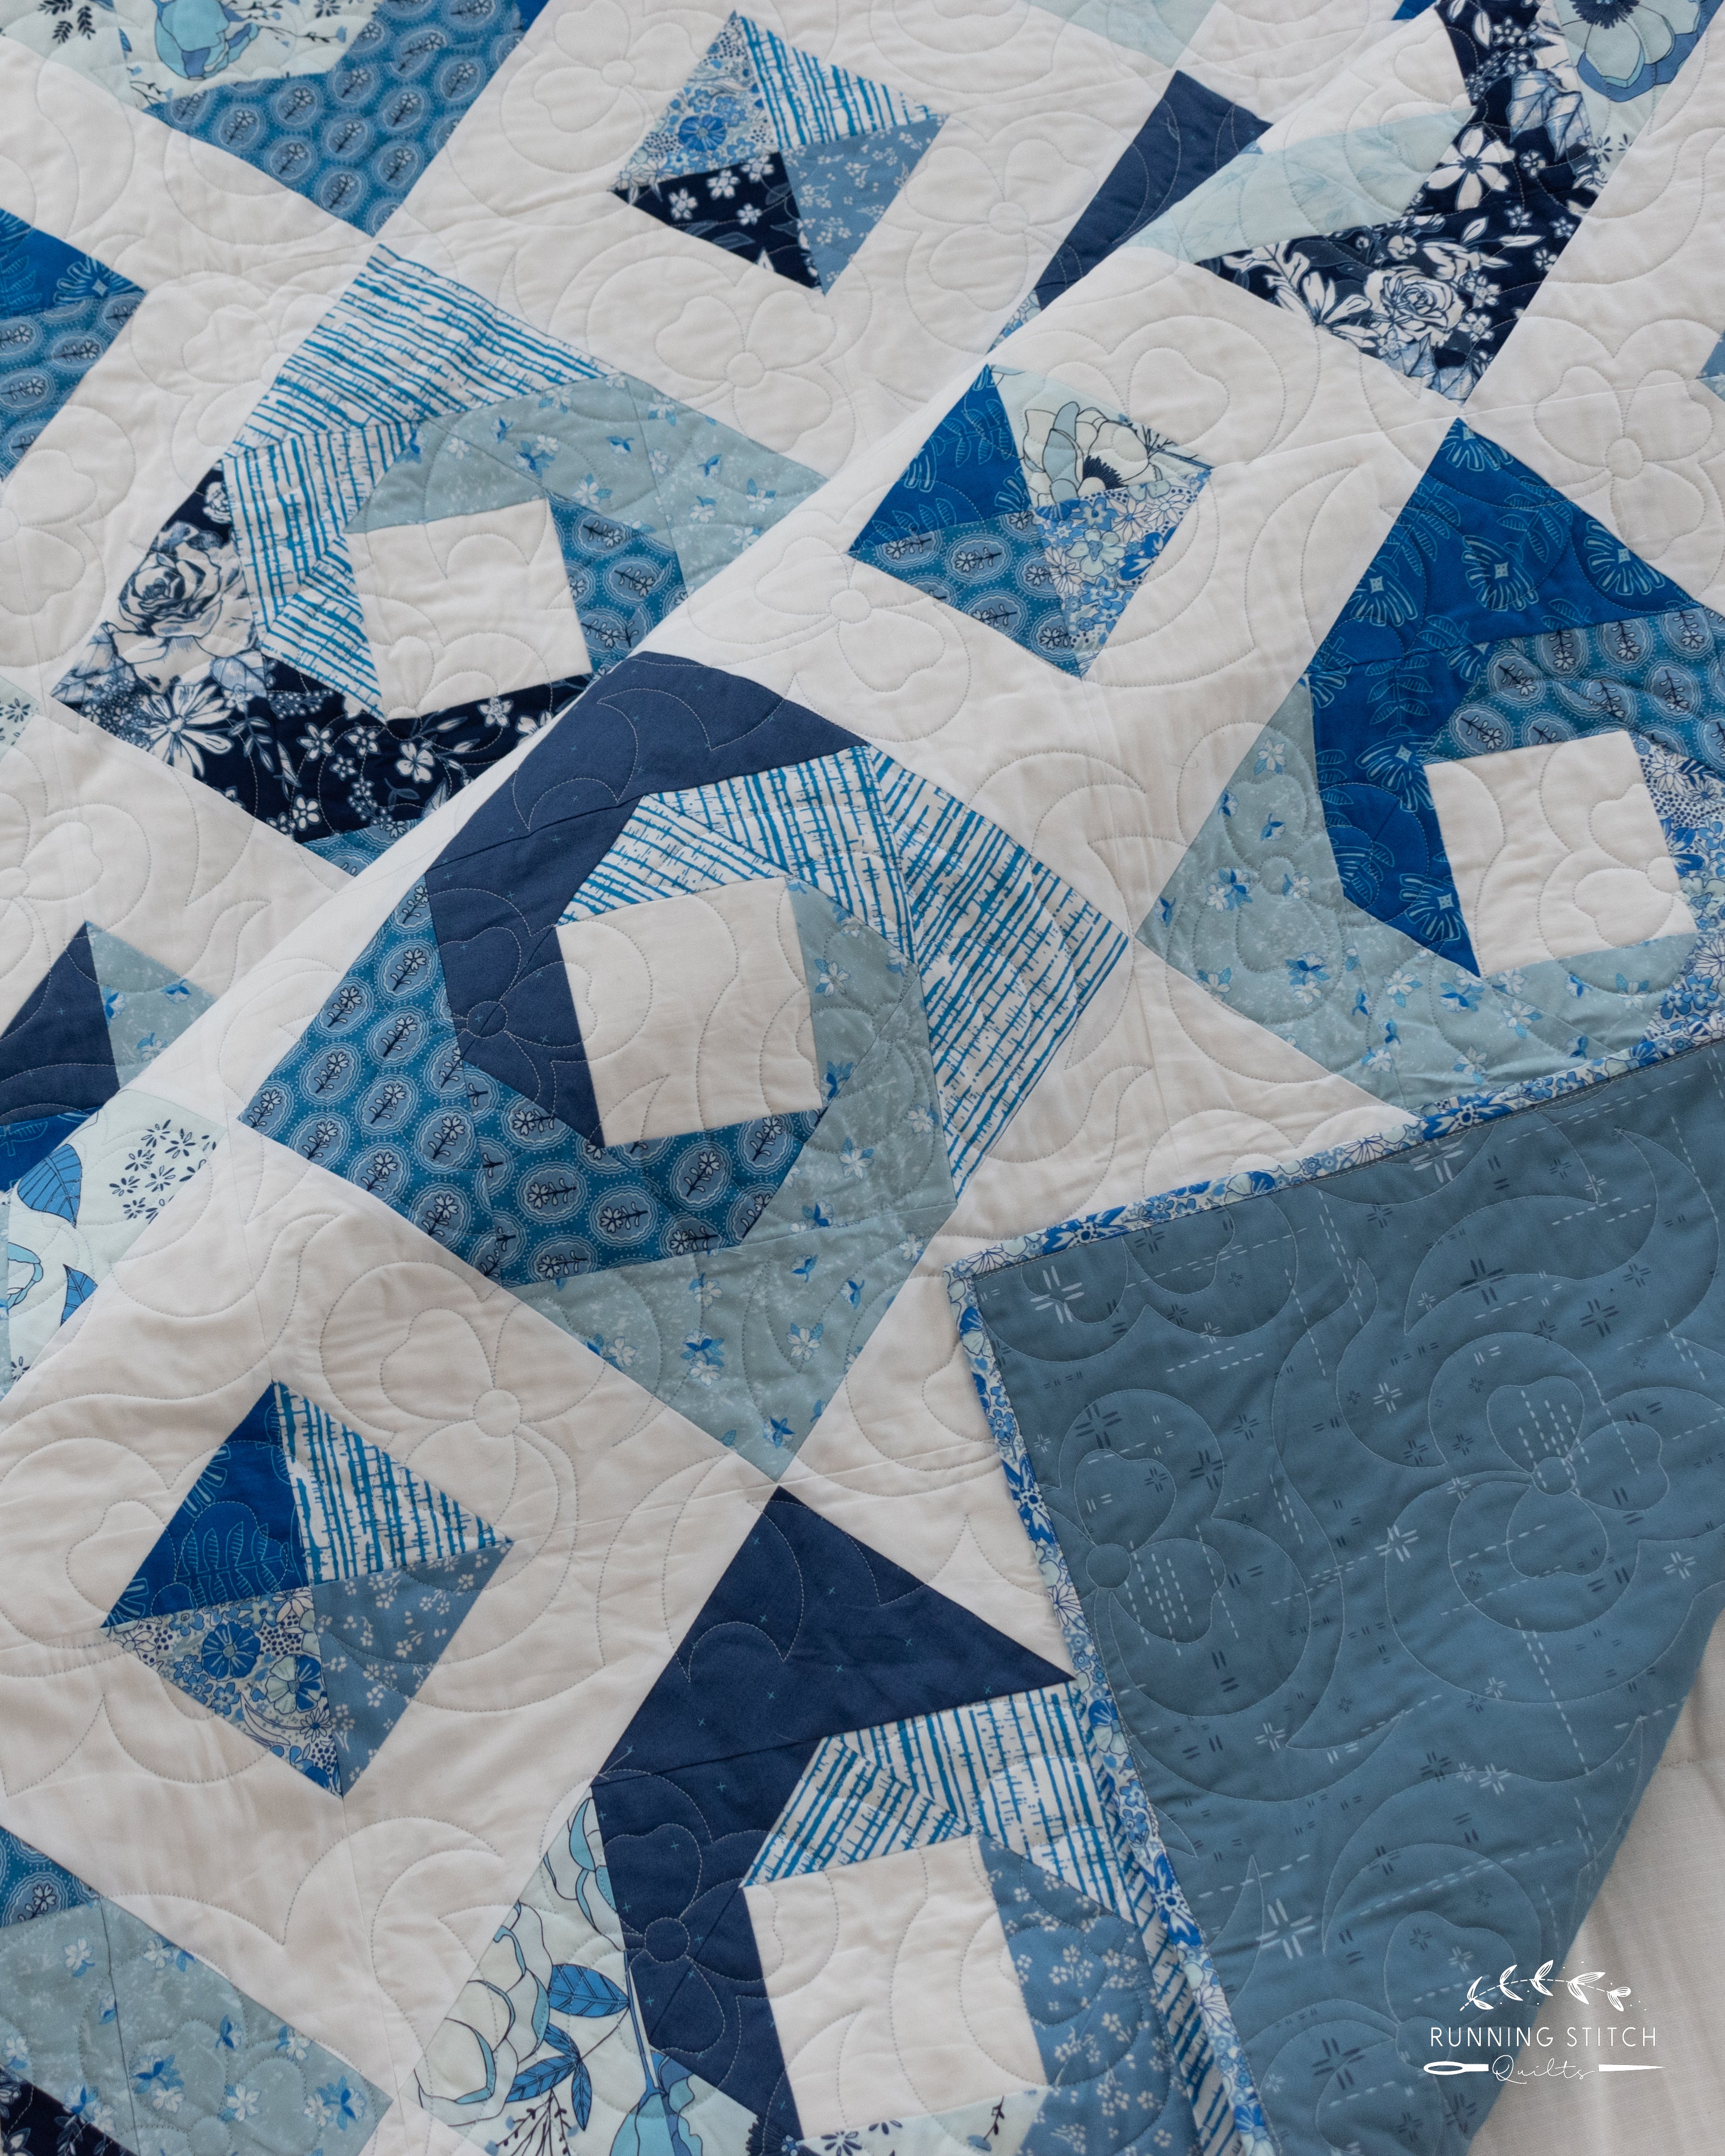 Hurrication - The True Blue One. A modern quilt showcasing the beautiful blues of an Art Gallery Fabrics quilting fabric collection.